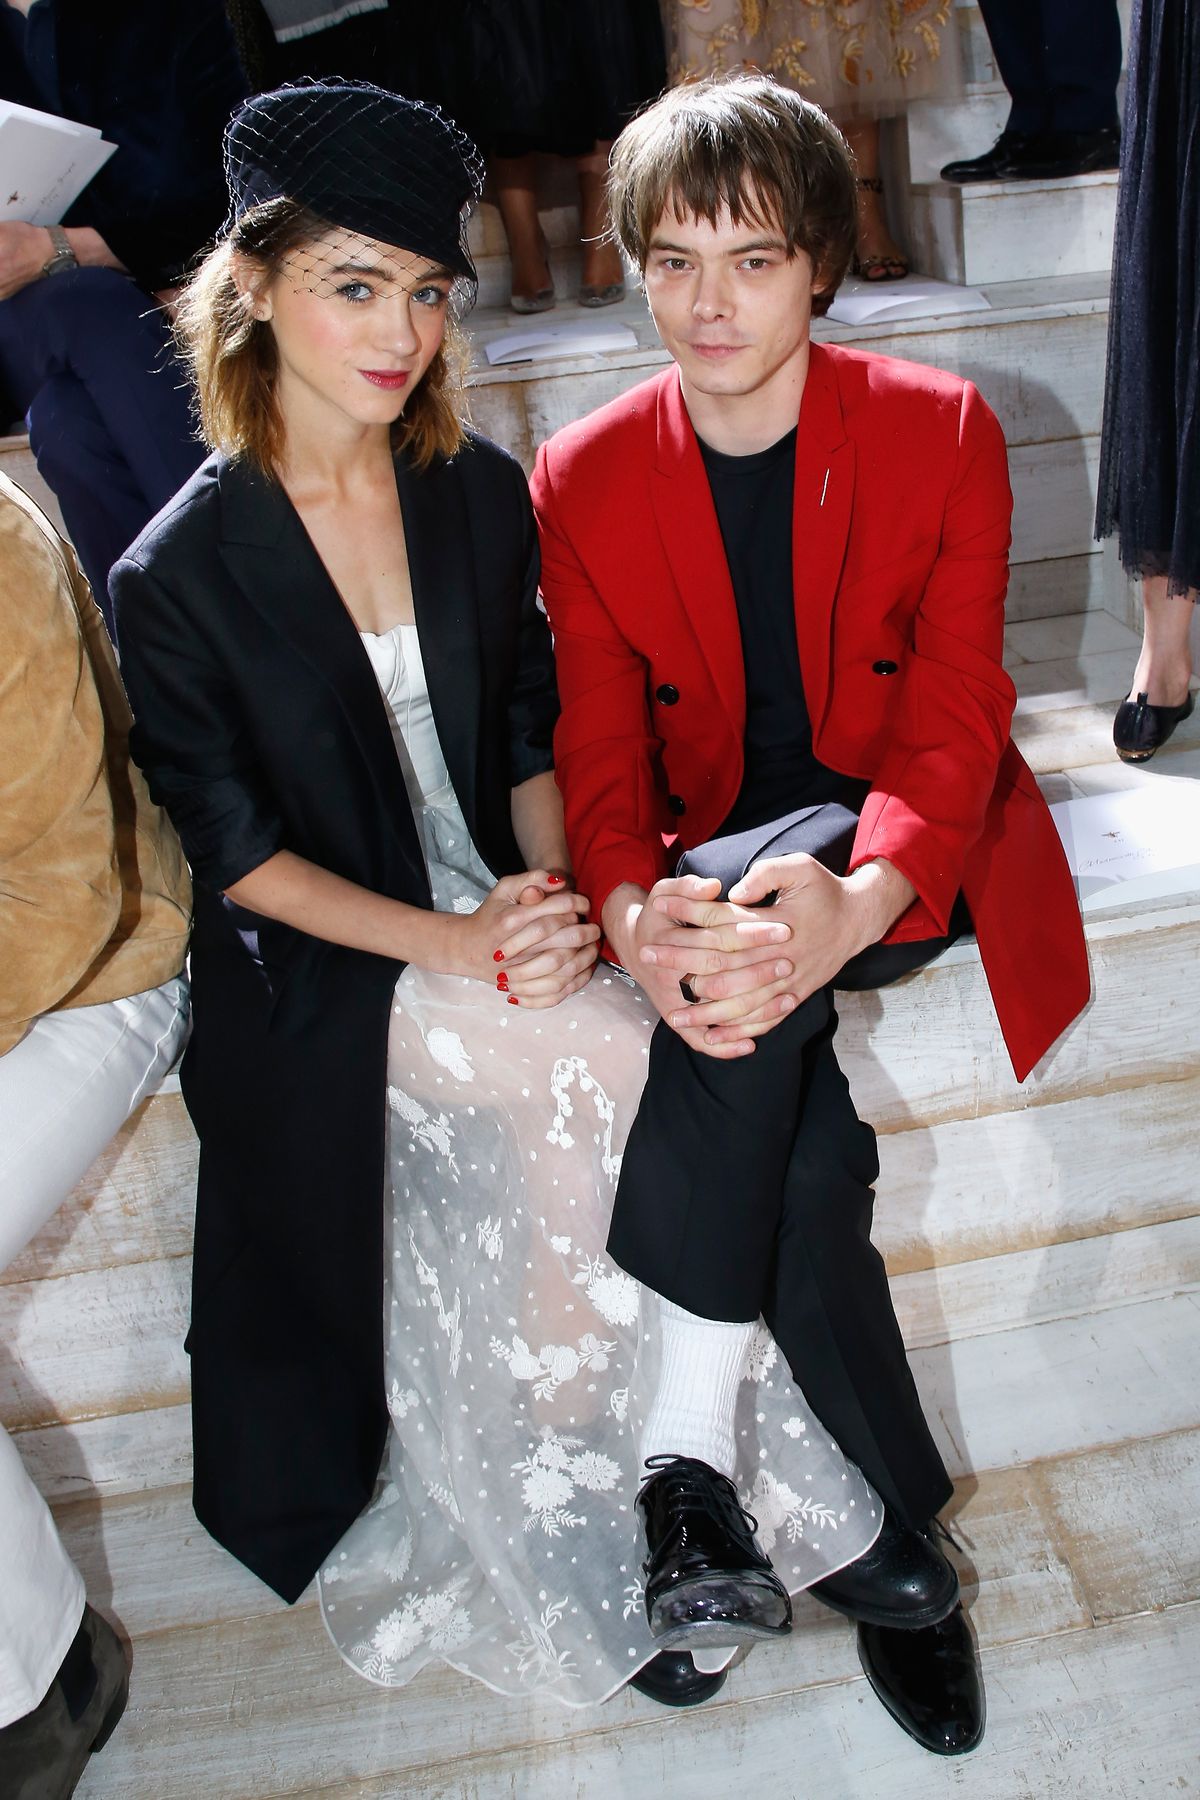 Christian Dior Couture S/S19 Cruise Collection : Front Row At Grandes Ecuries De Chantilly